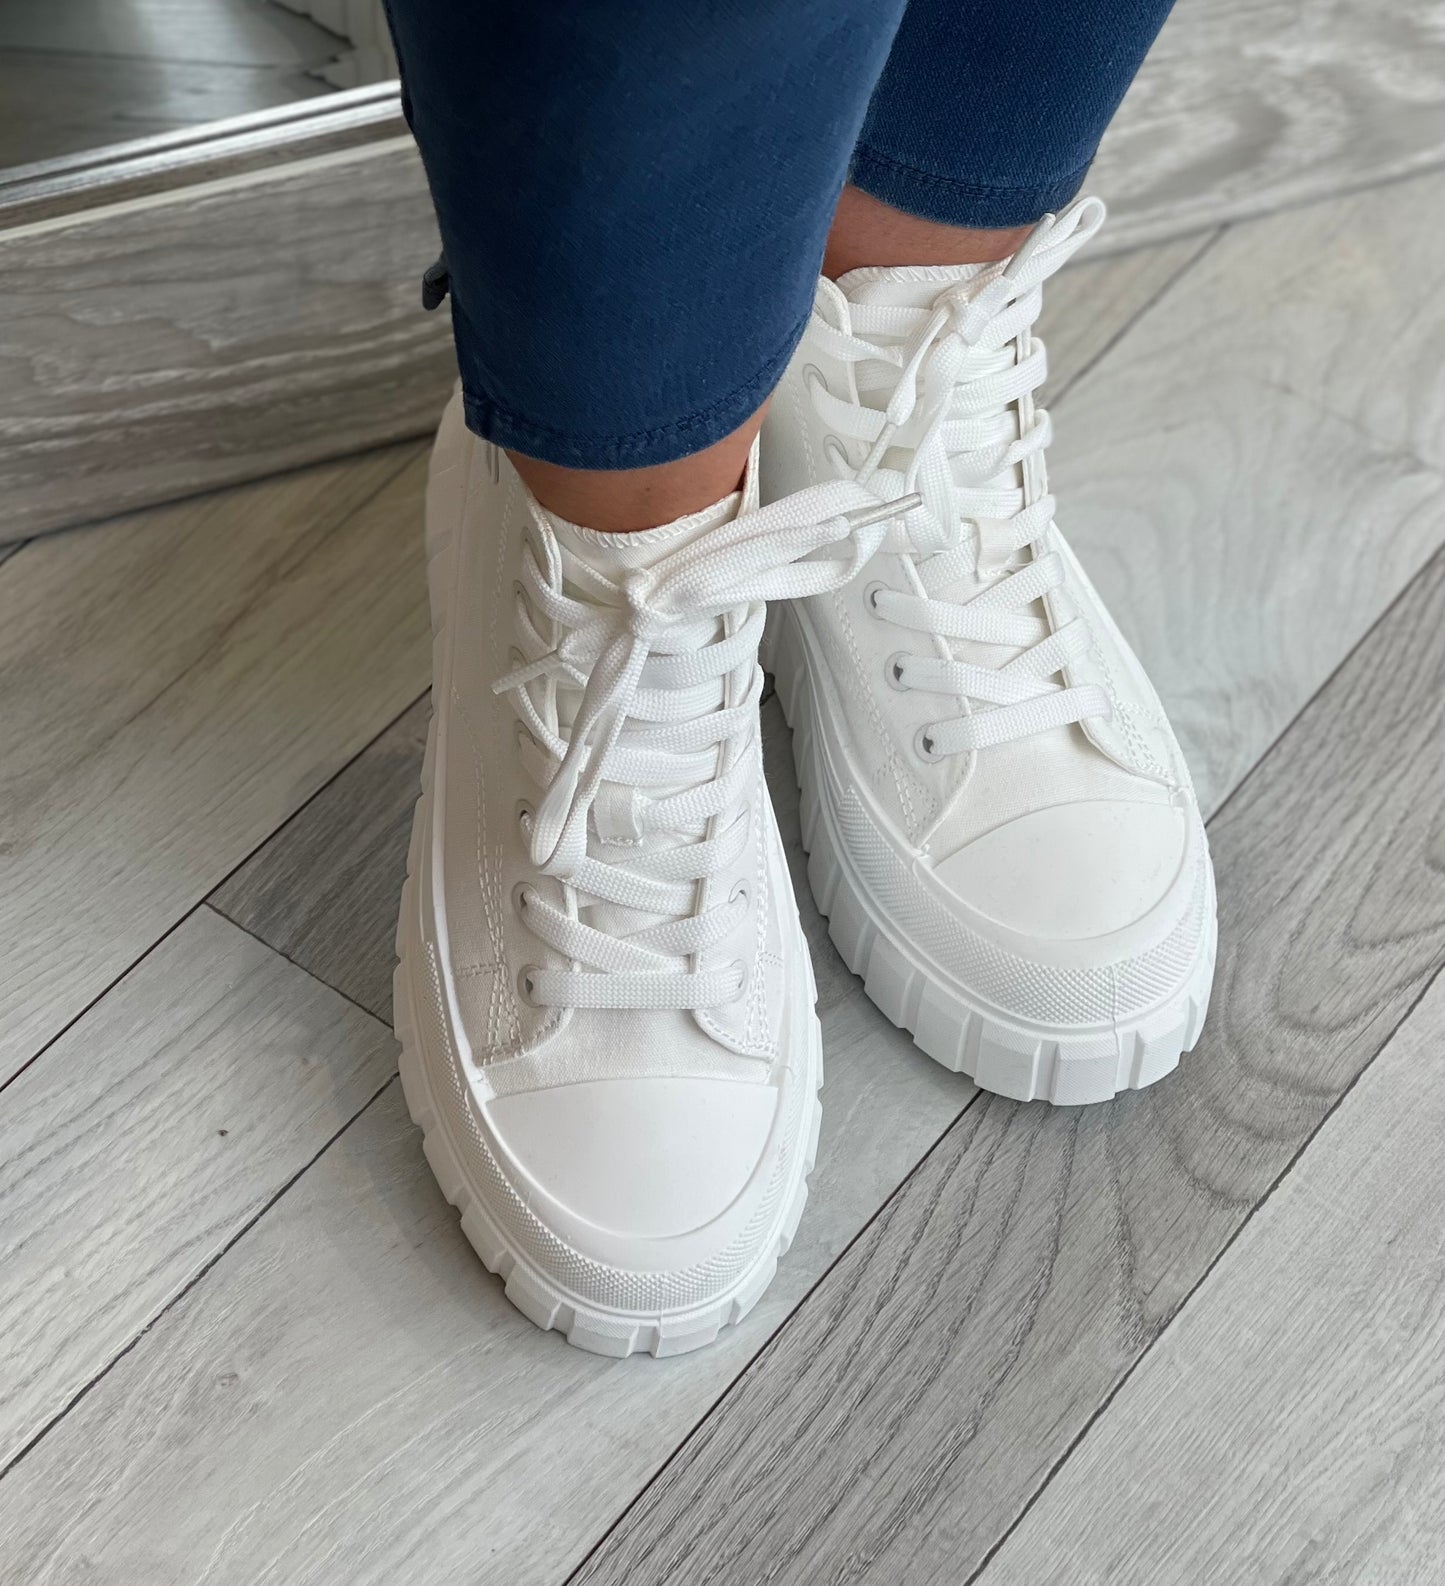 S Oliver - White Canvas High Top Trainer